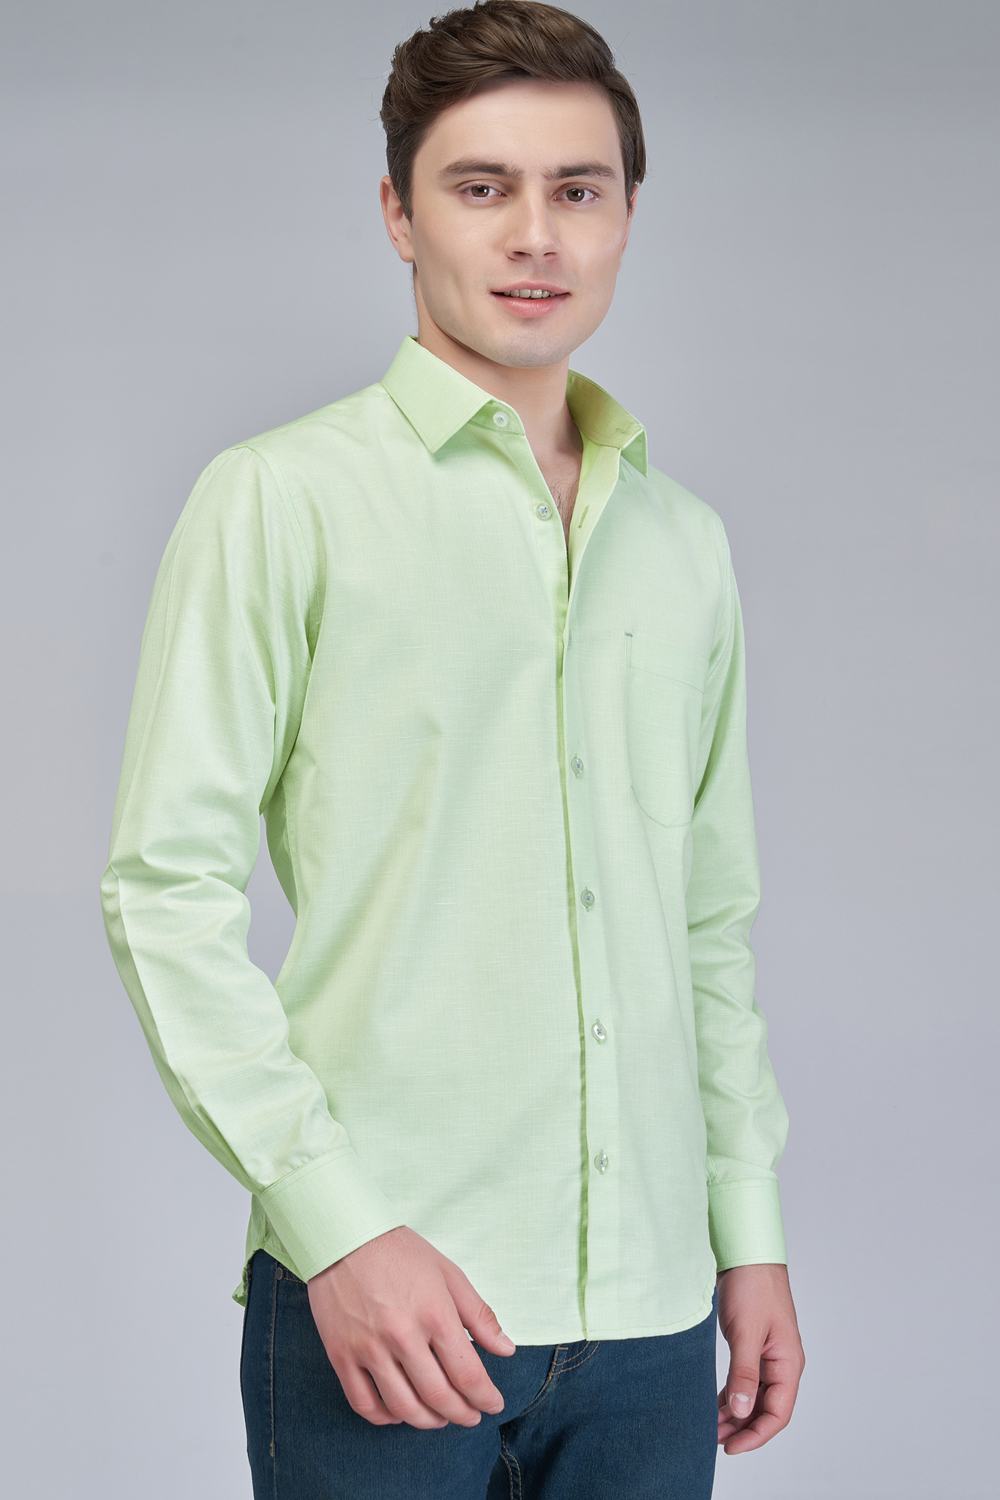 Office Casual Shirt for Men